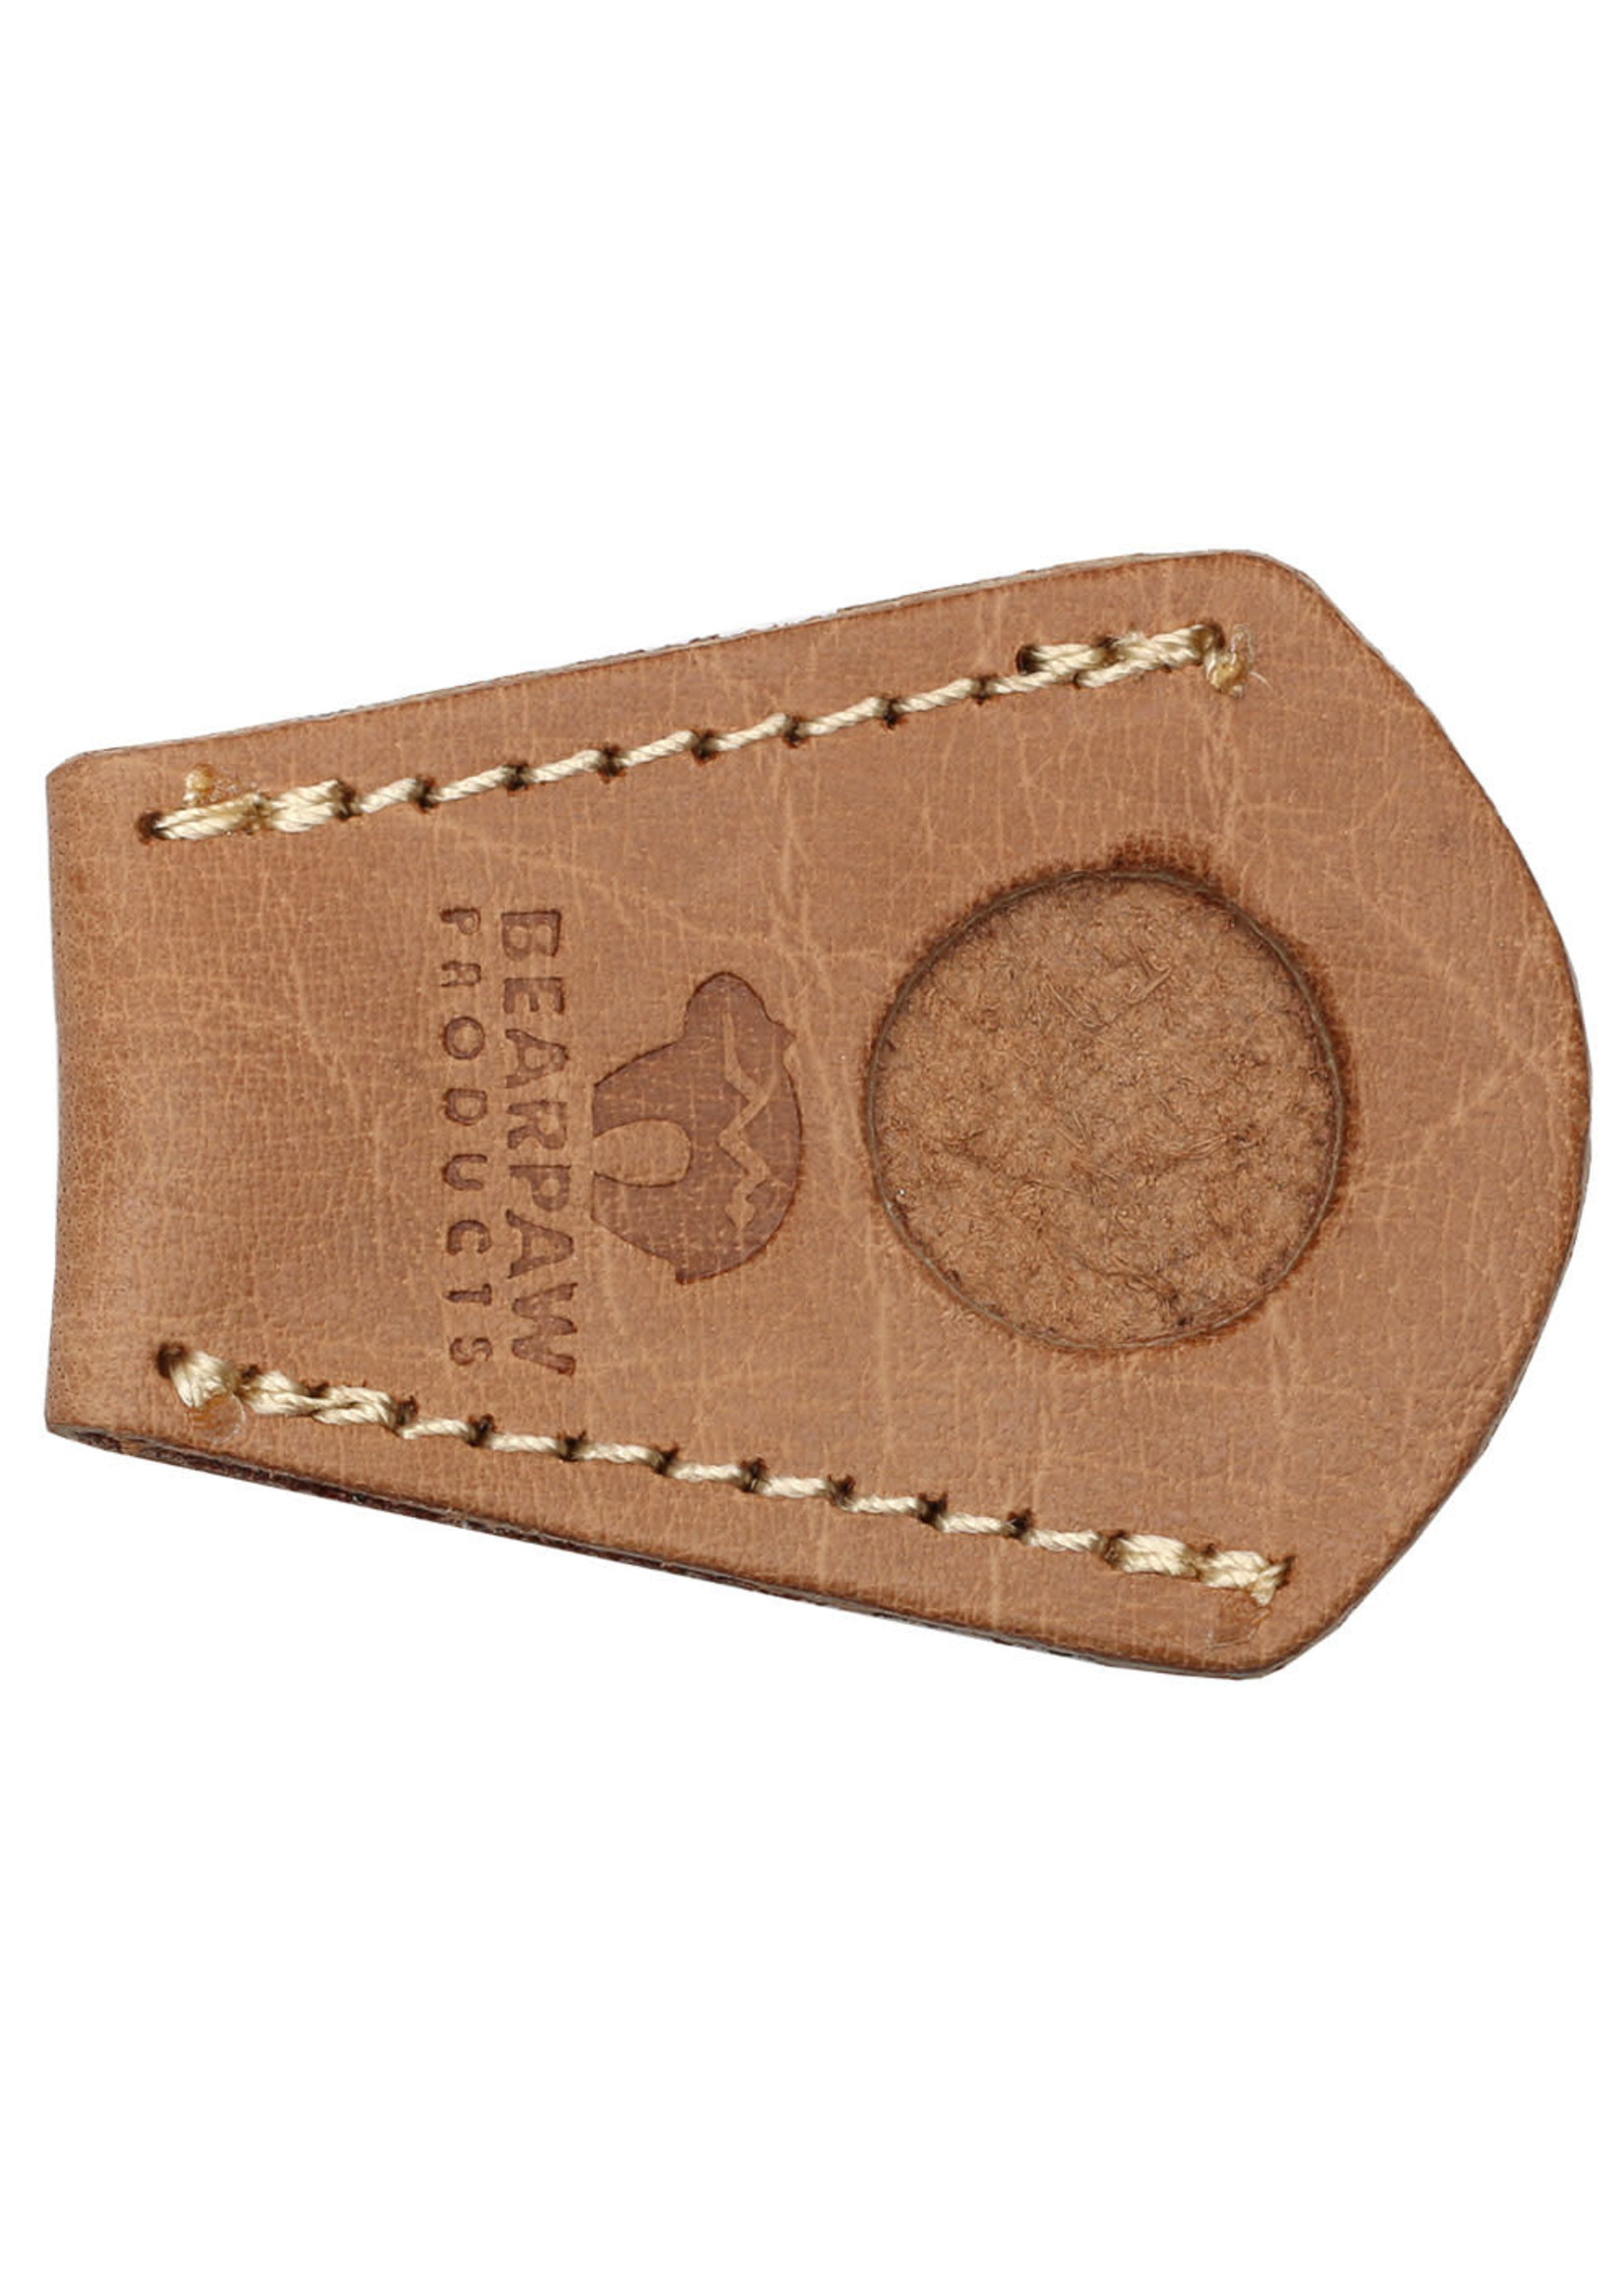 Bearpaw tip protector leather